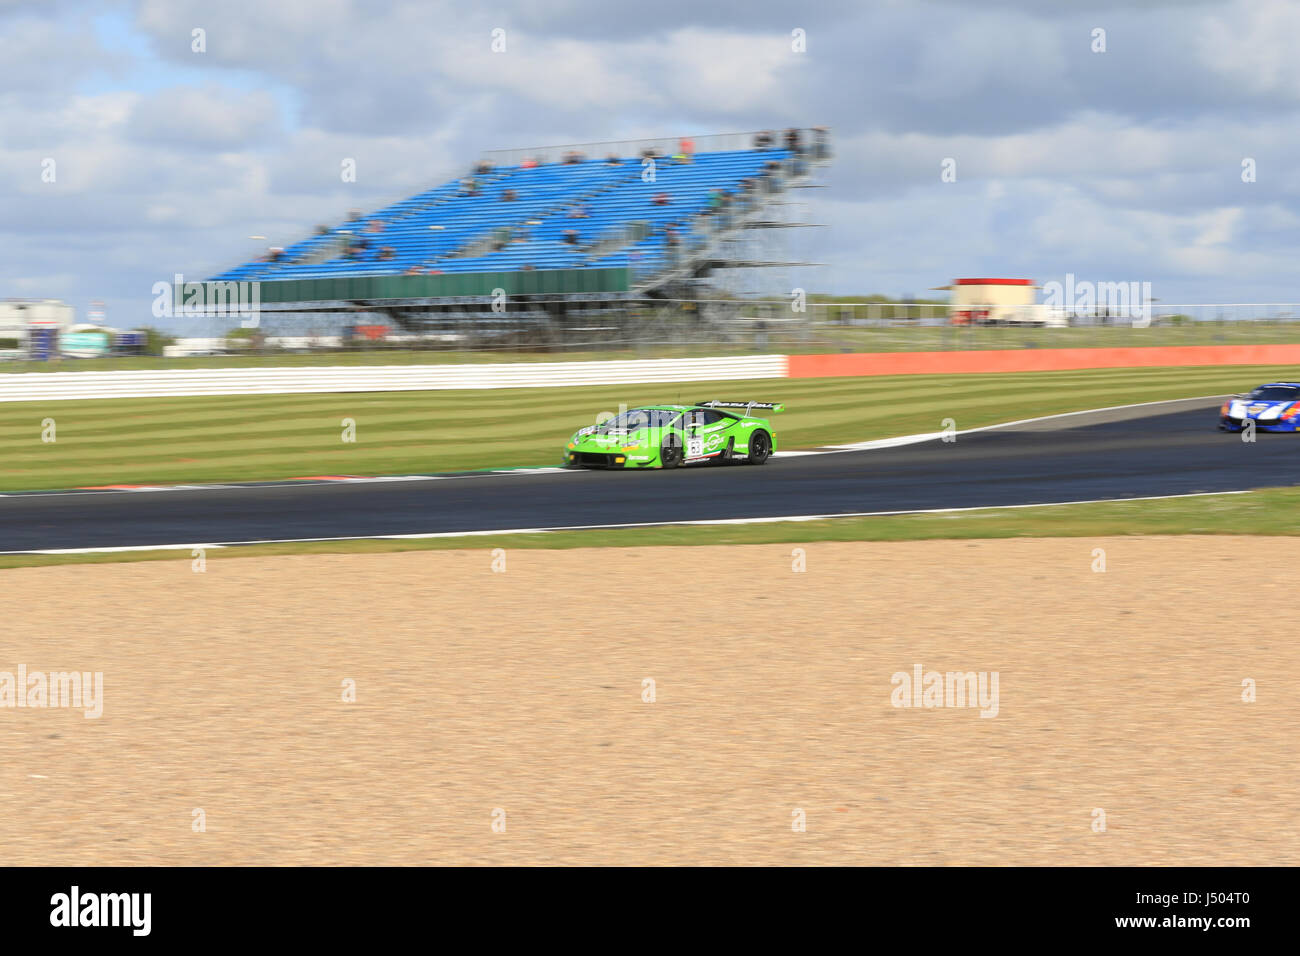 Silverstone, United Kingdom. 14th May, 2017. The number 63 Lamborghini Huracan GT3 of GRT Grasser Racing Team which took the win in the race Credit: Paren Raval/Alamy Live News Stock Photo